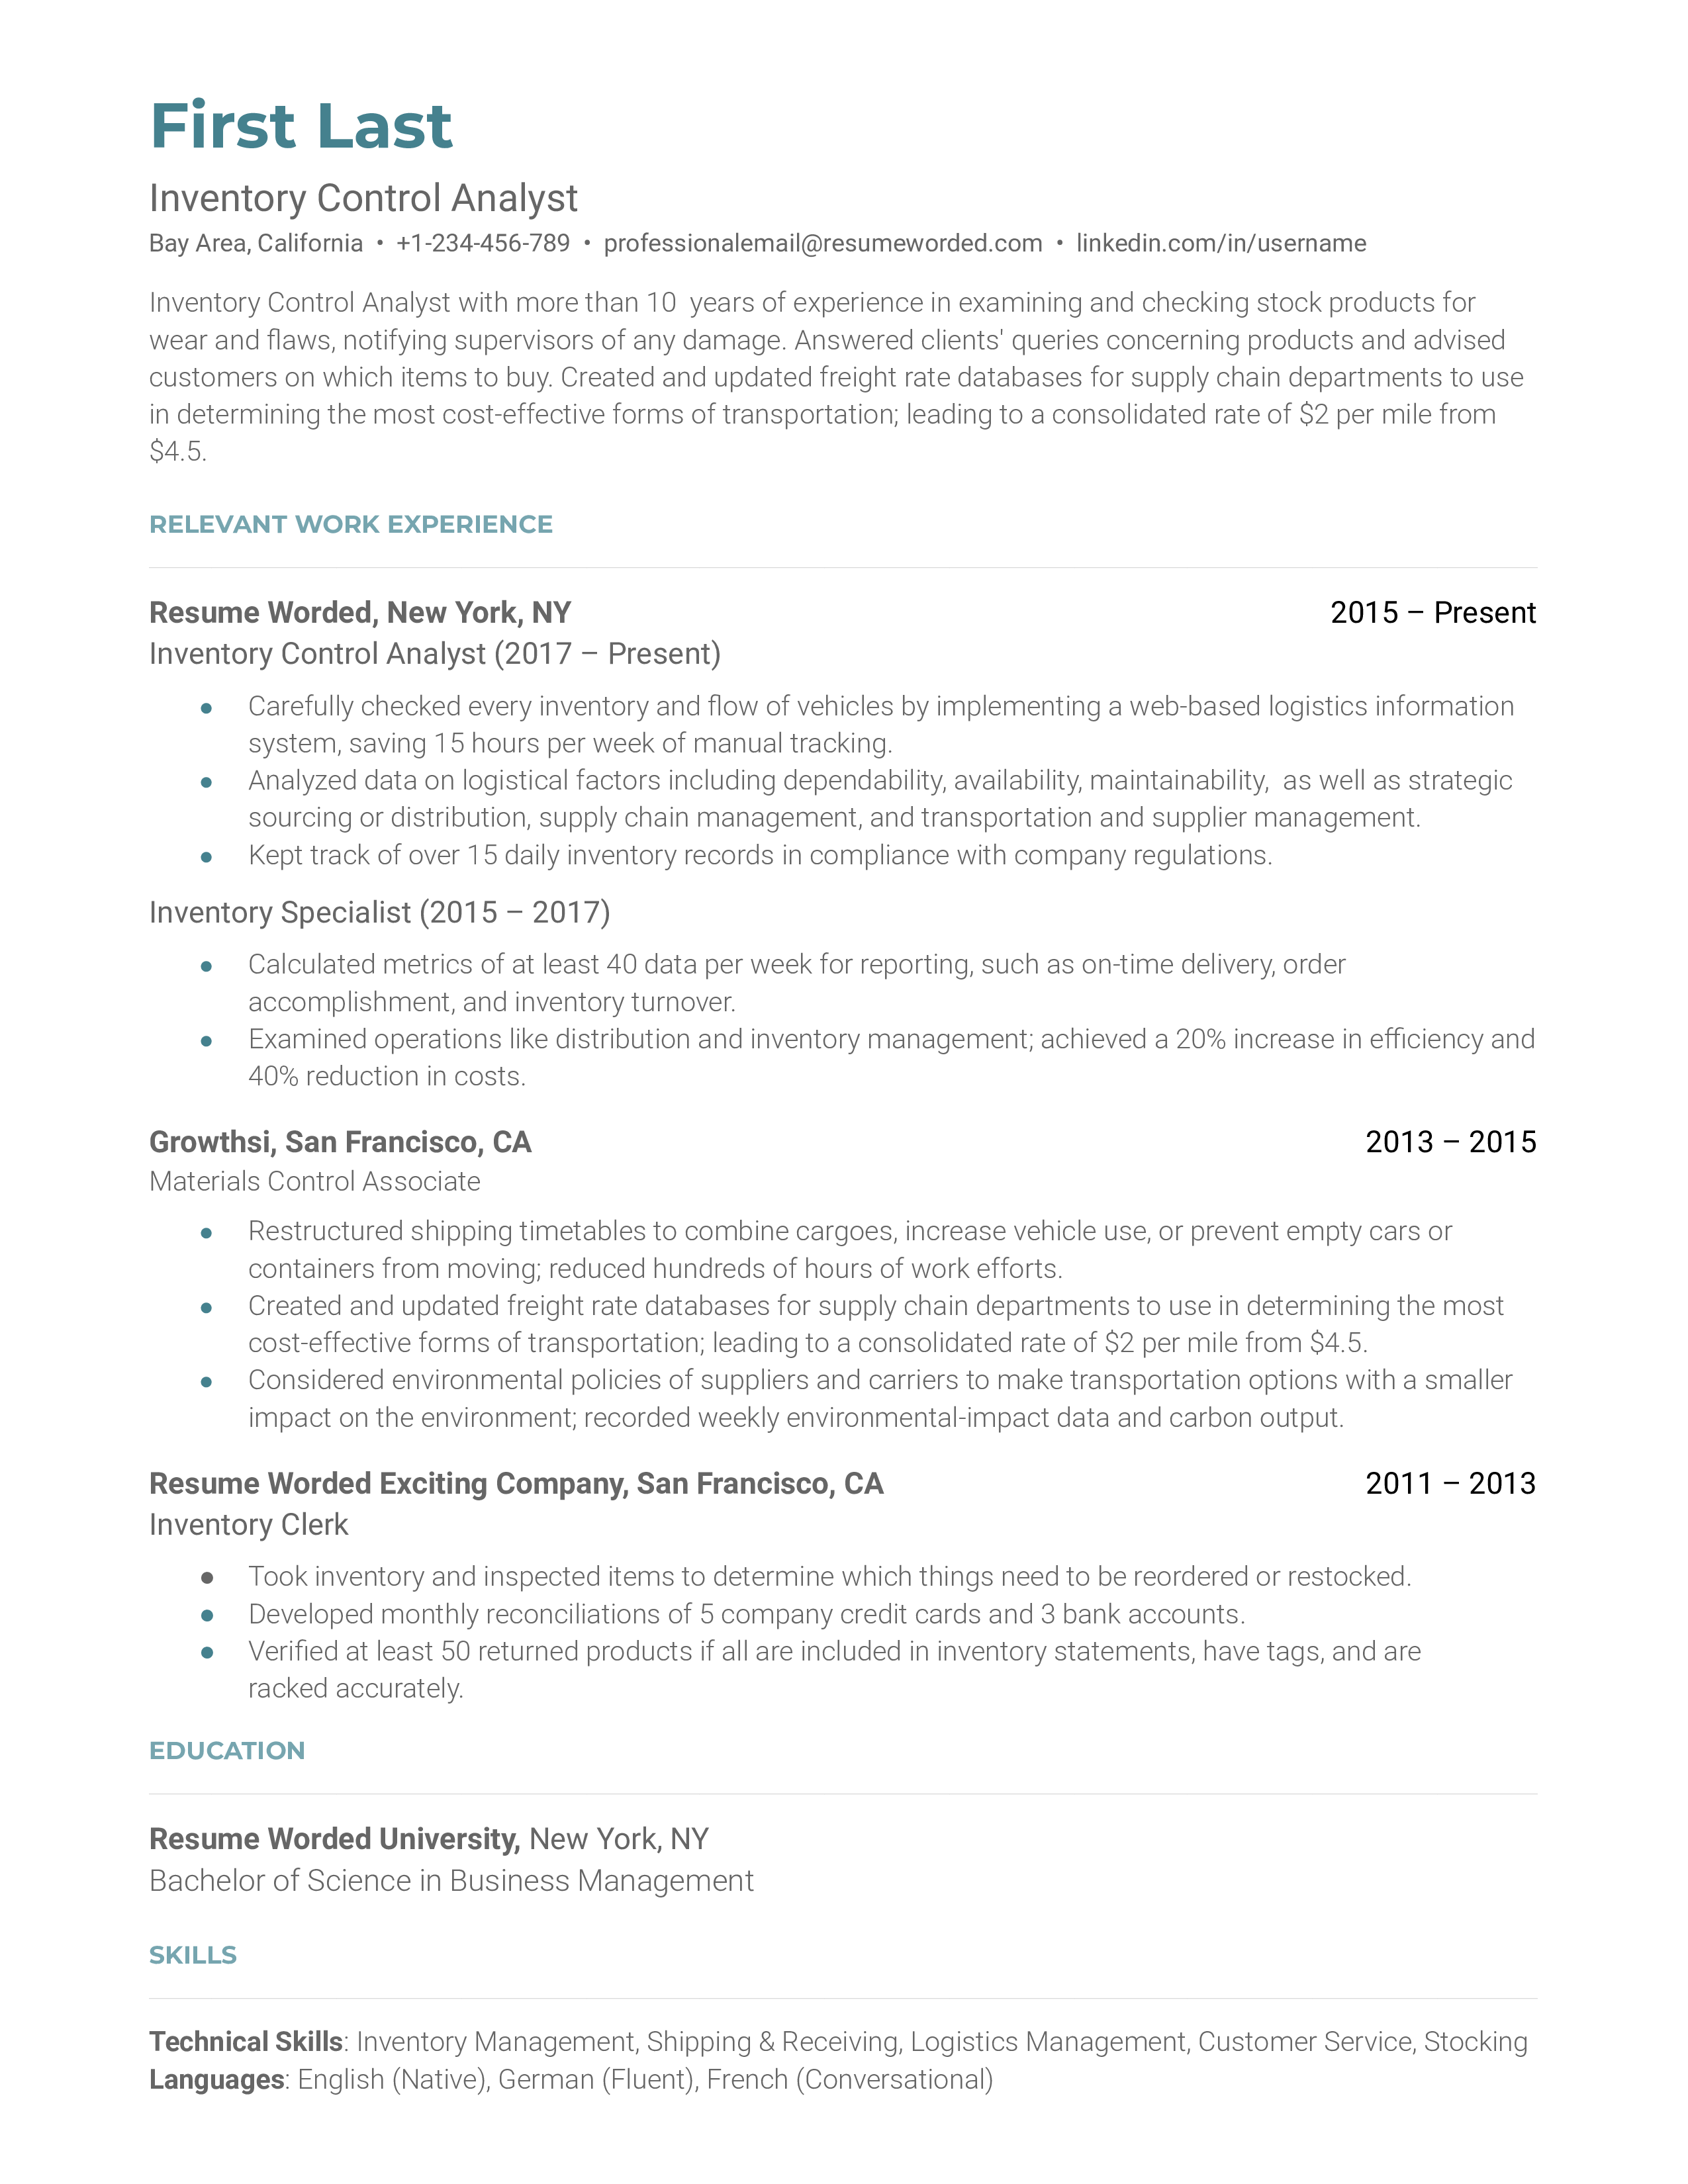 An Inventory Control Analyst resume sample showing the applicant's extensive work experience and inventory management skills